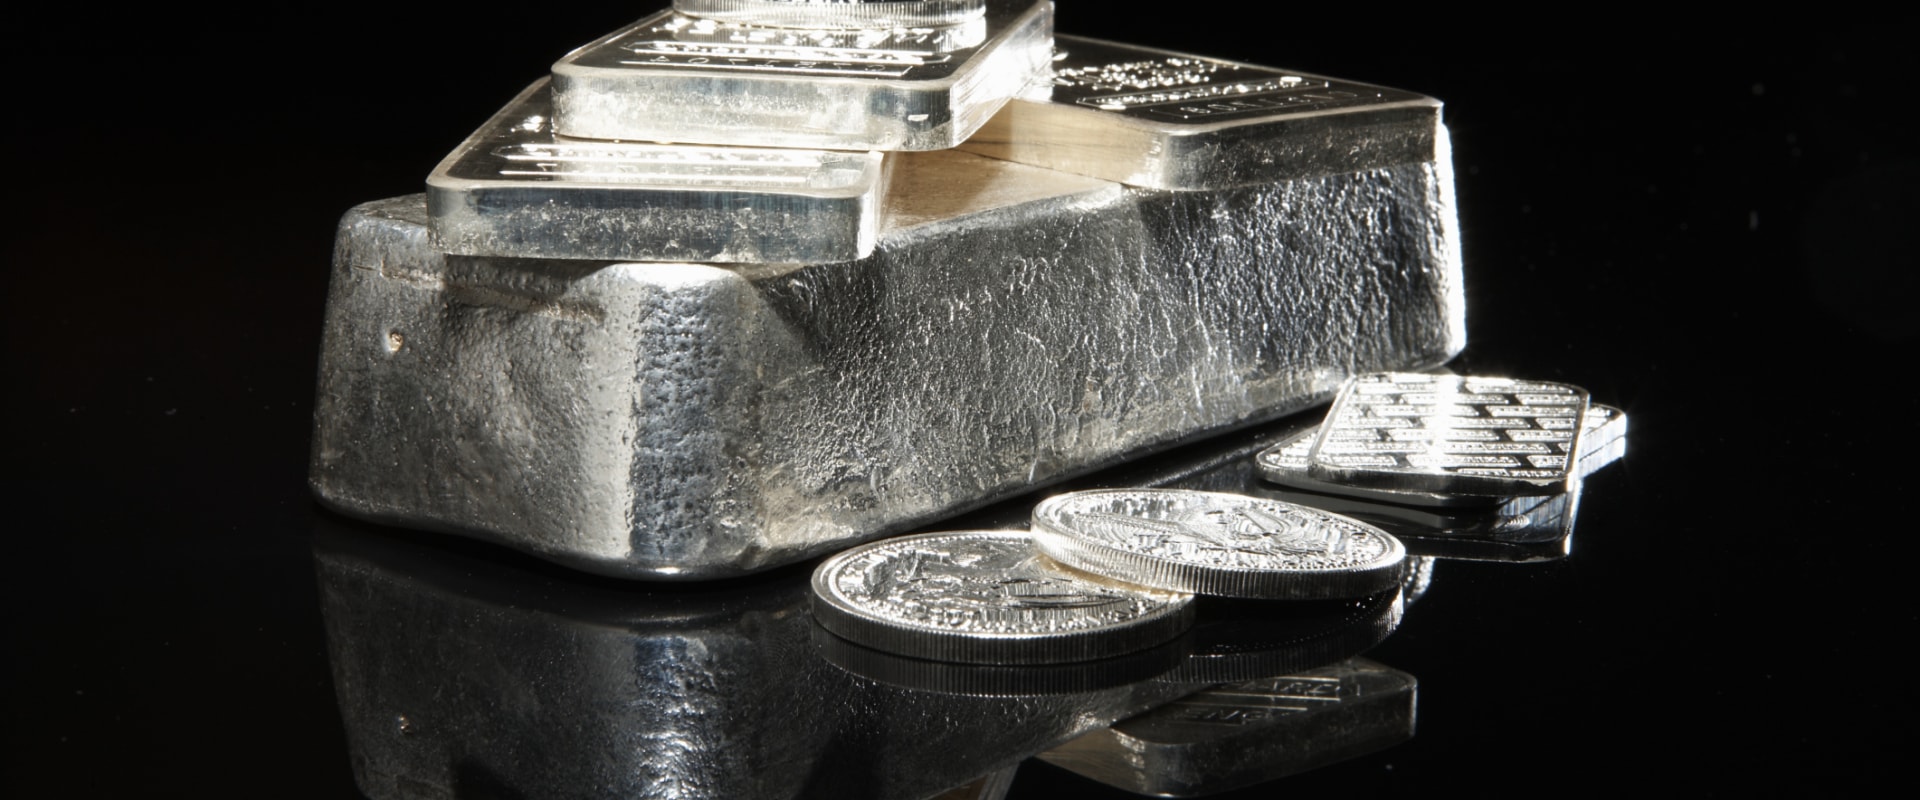 Will silver increase in value?